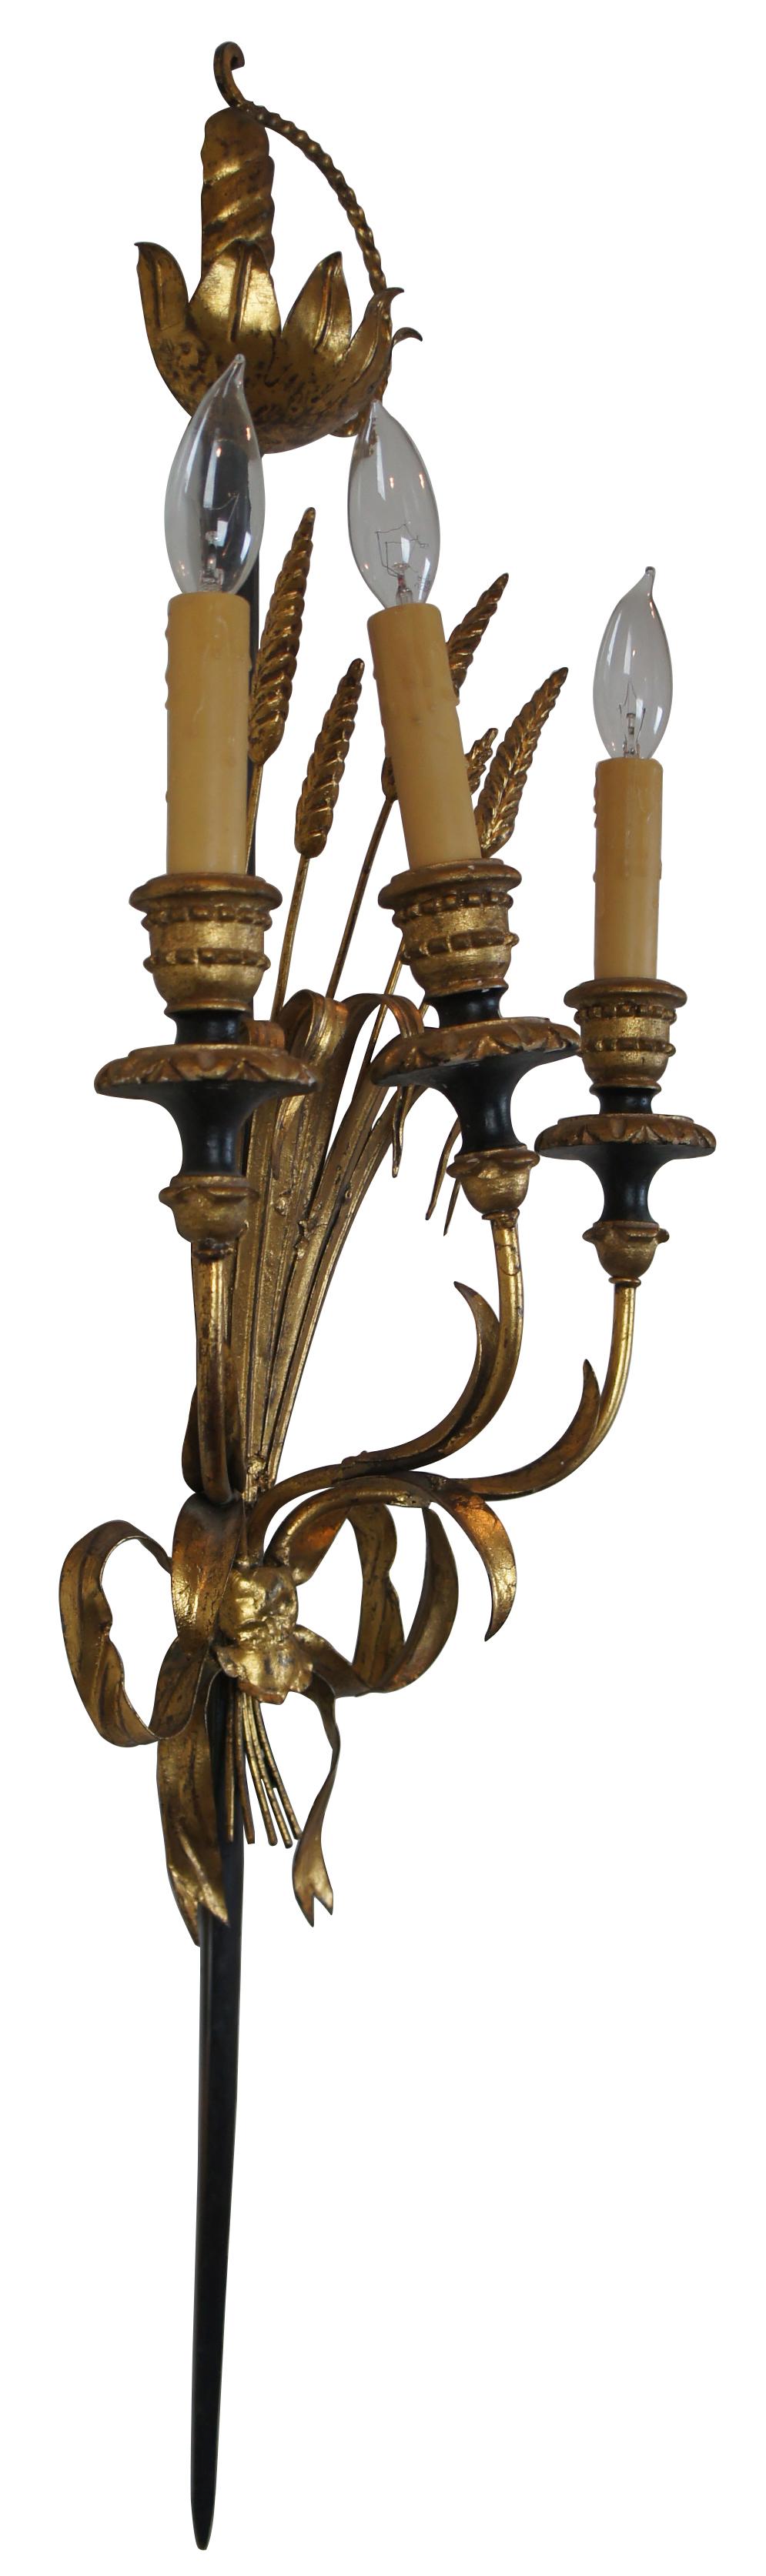 Vintage Italian toleware Florentine three-light wall sconce shaped like a small sheaf of wheat tied with a bow to a rapier or sword. Measures: 37”.
  